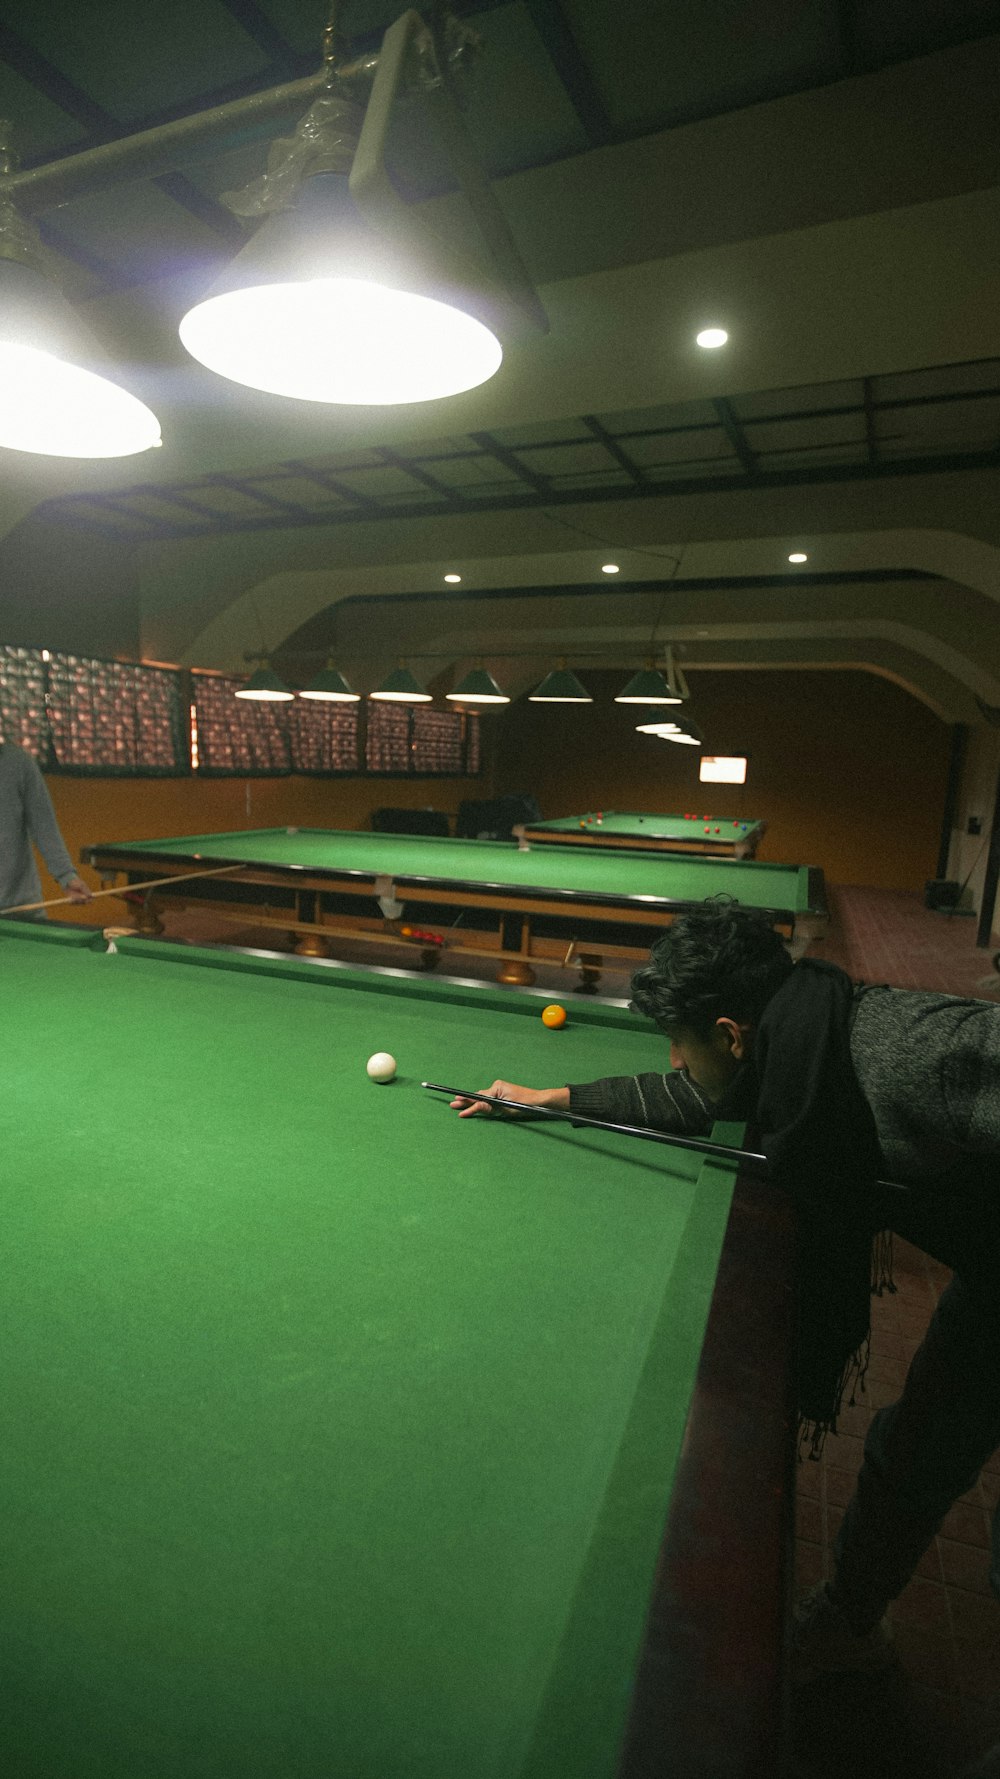 two people playing pool in a large room